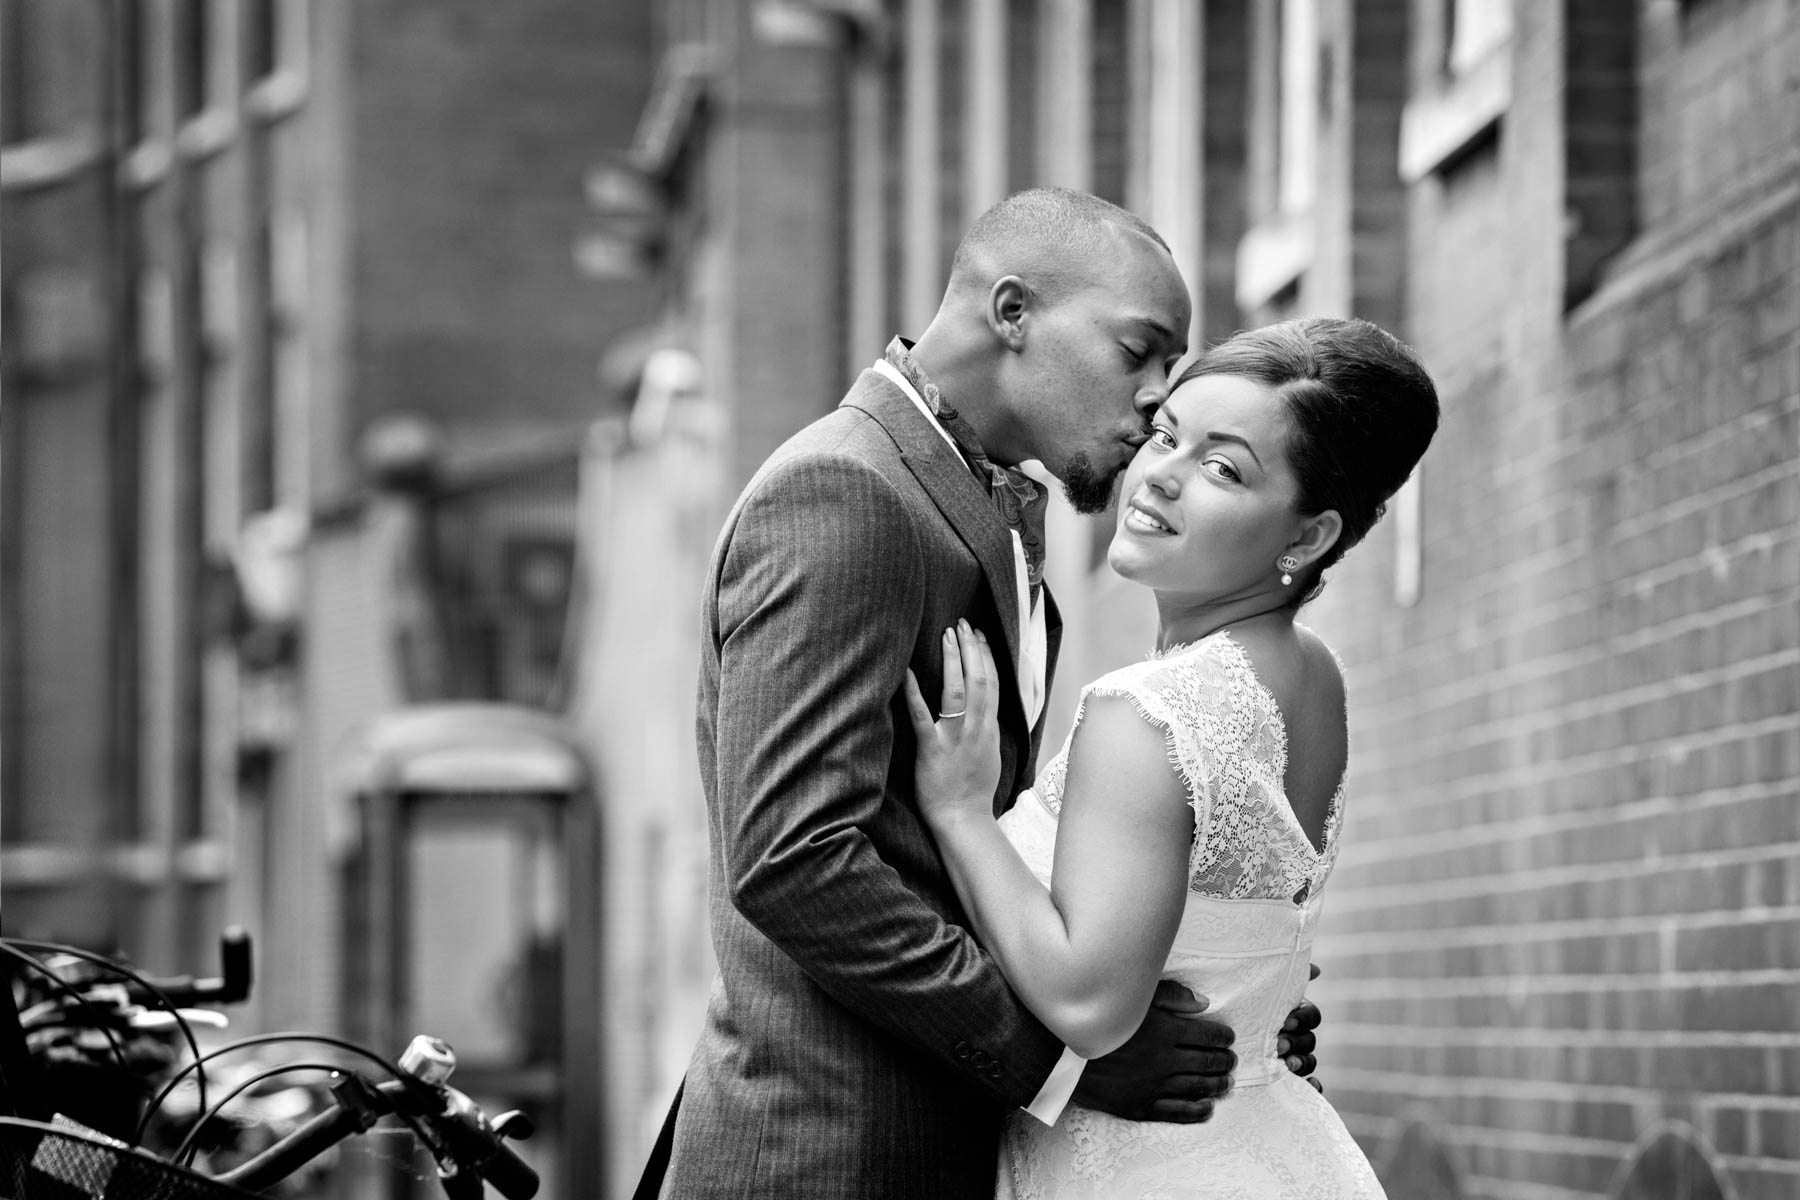 A sensual black and white wedding portrait in Chelsea with the bride smiling sexily at the camera whilst the groom kisses her on the cheek.